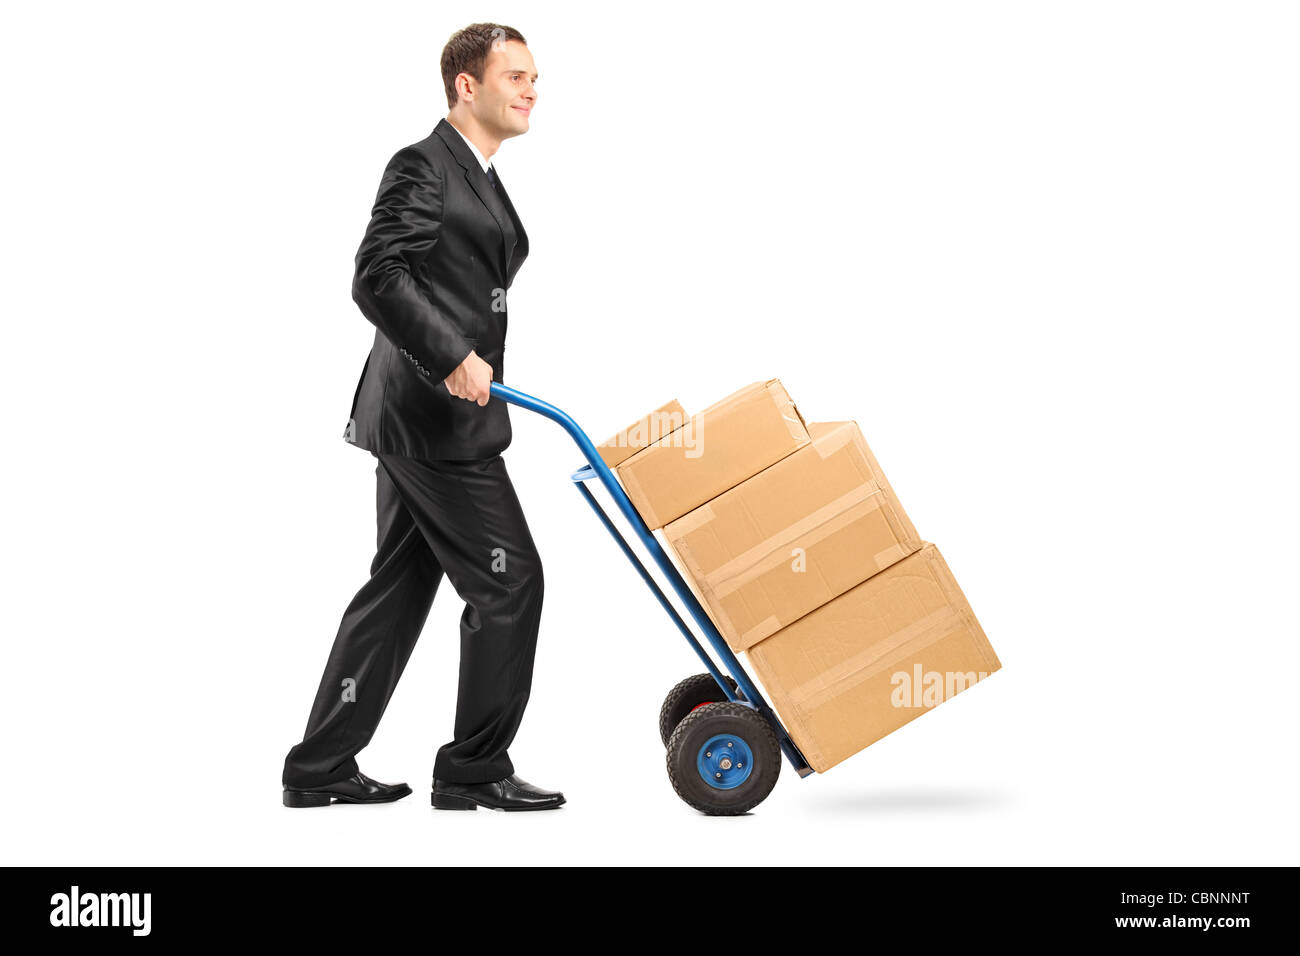 Full length portrait of a businessman pushing a hand truck full with cardboard boxes Stock Photo